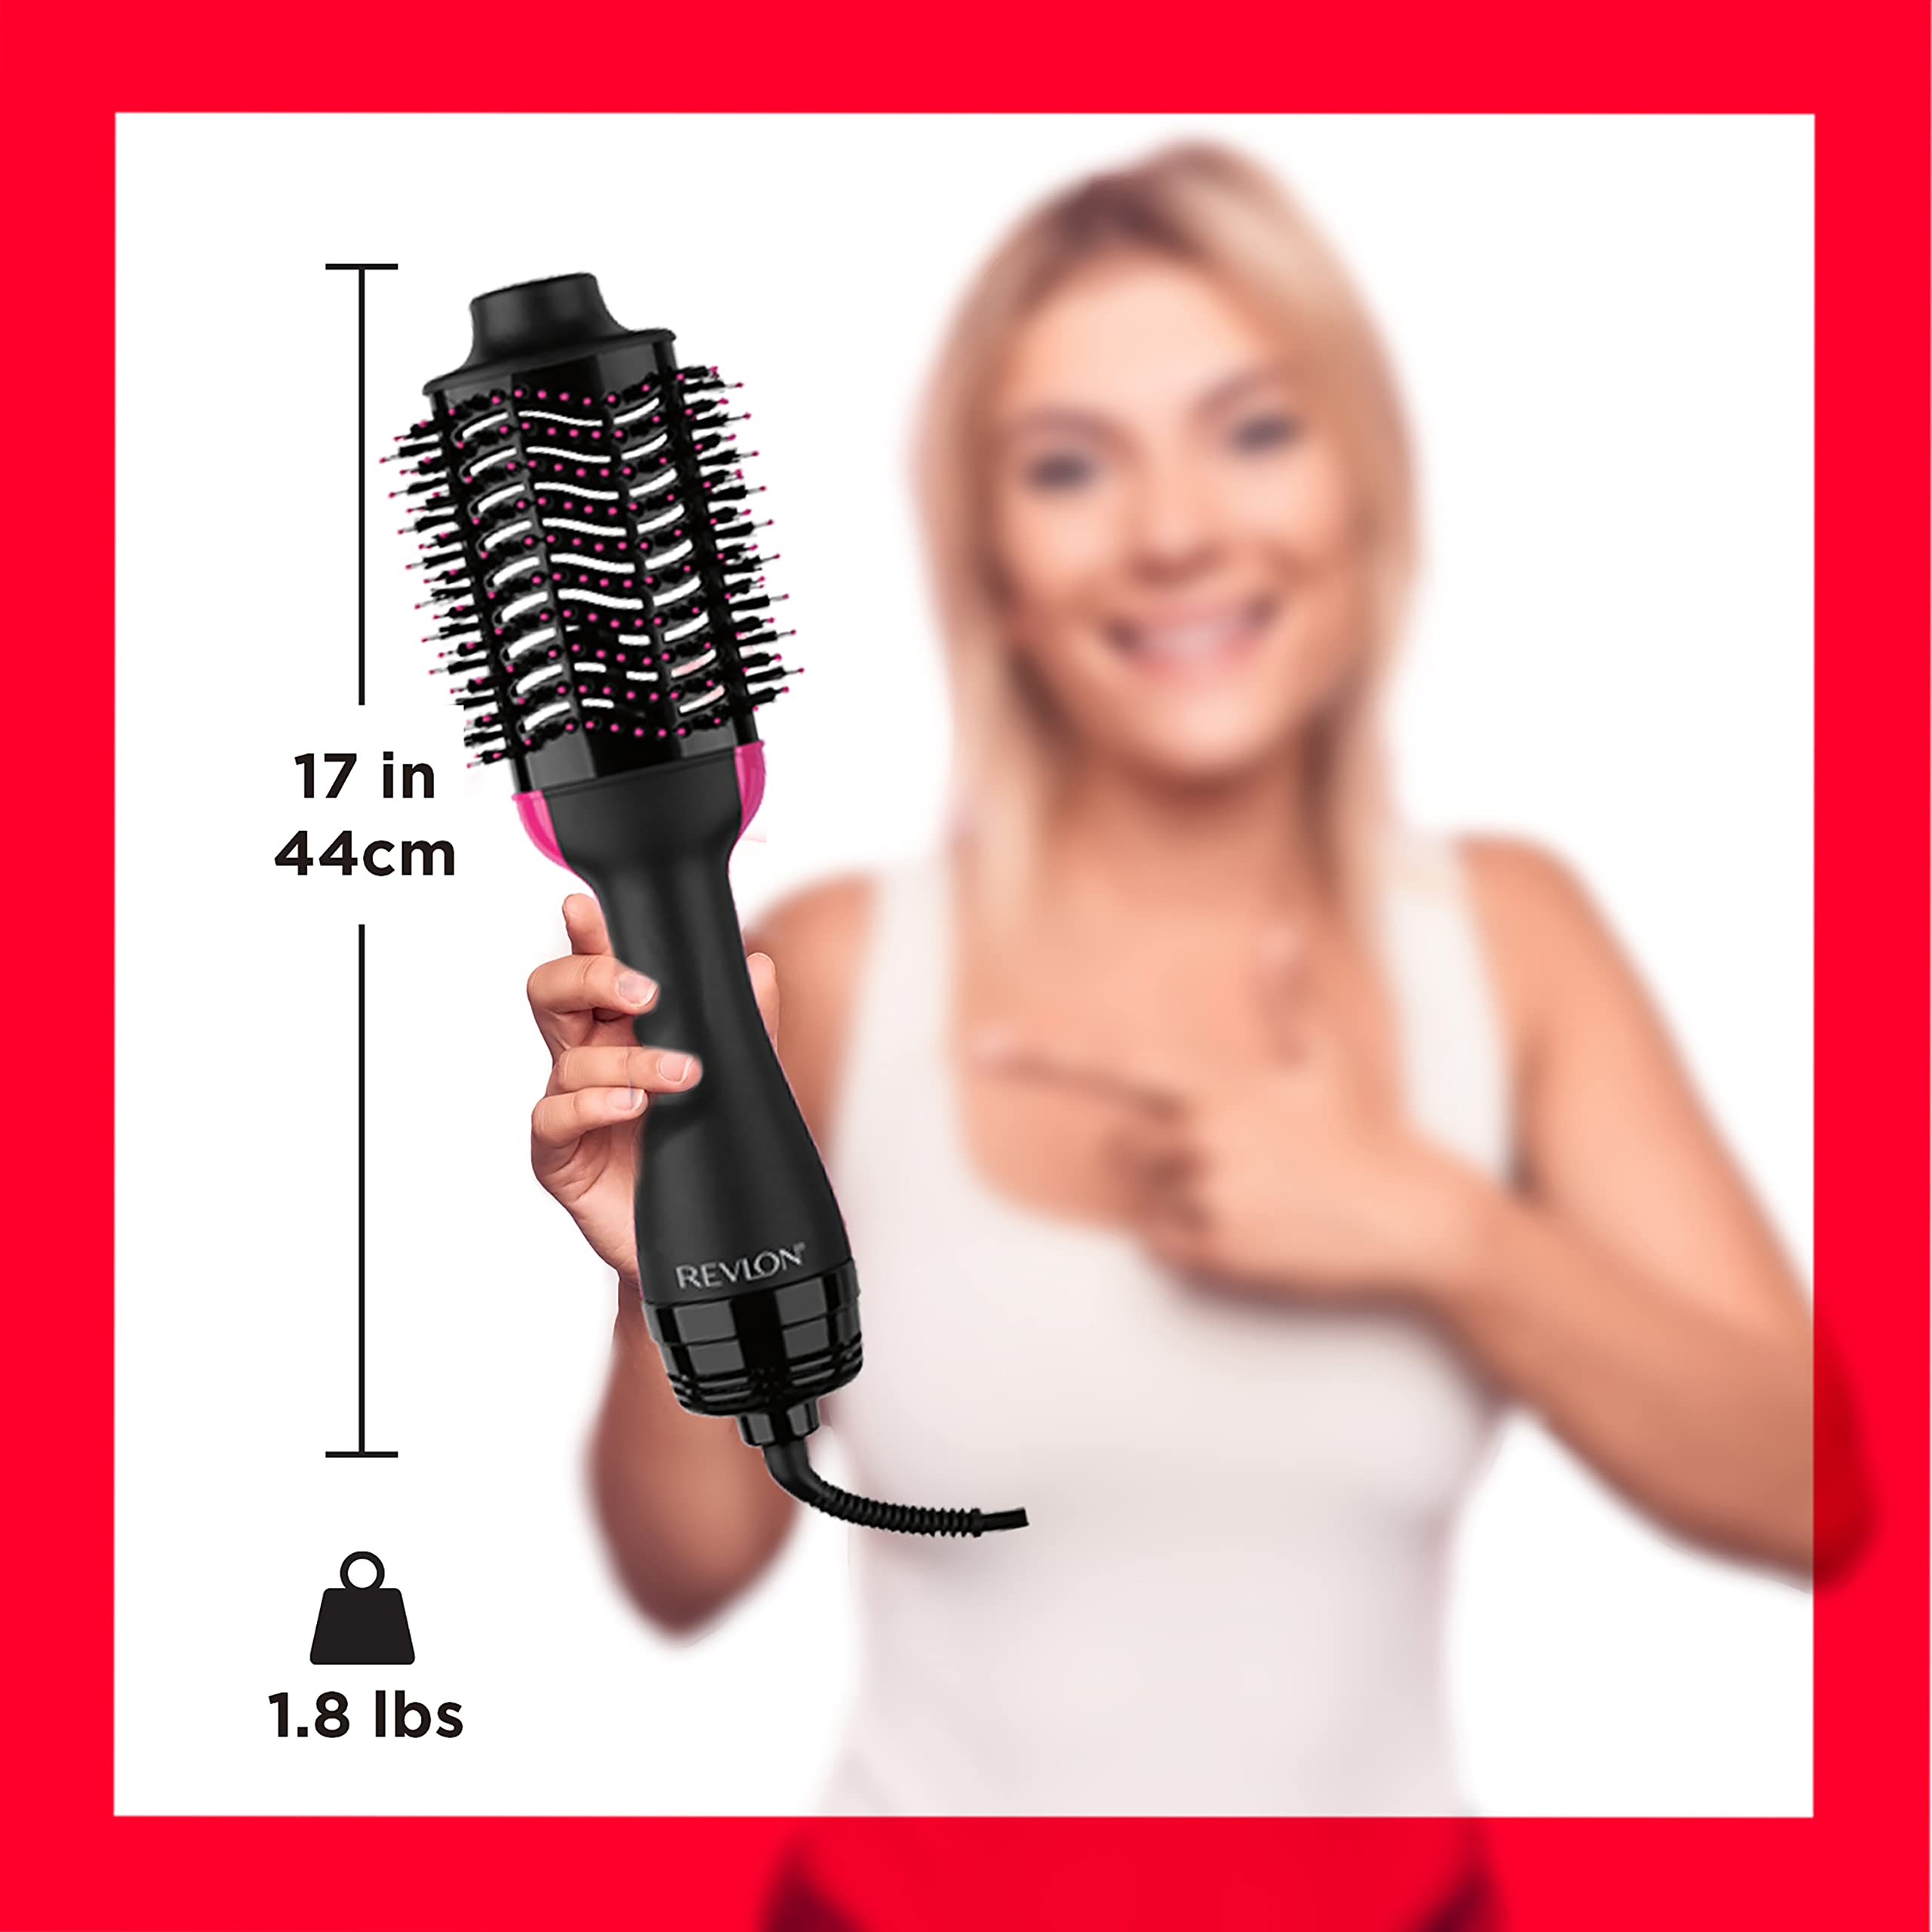 REVLON One-Step Volumizer Enhanced 1.0 Hair Dryer and Hot Air Brush | Now with Improved Motor | Amazon Exclusive (Black)